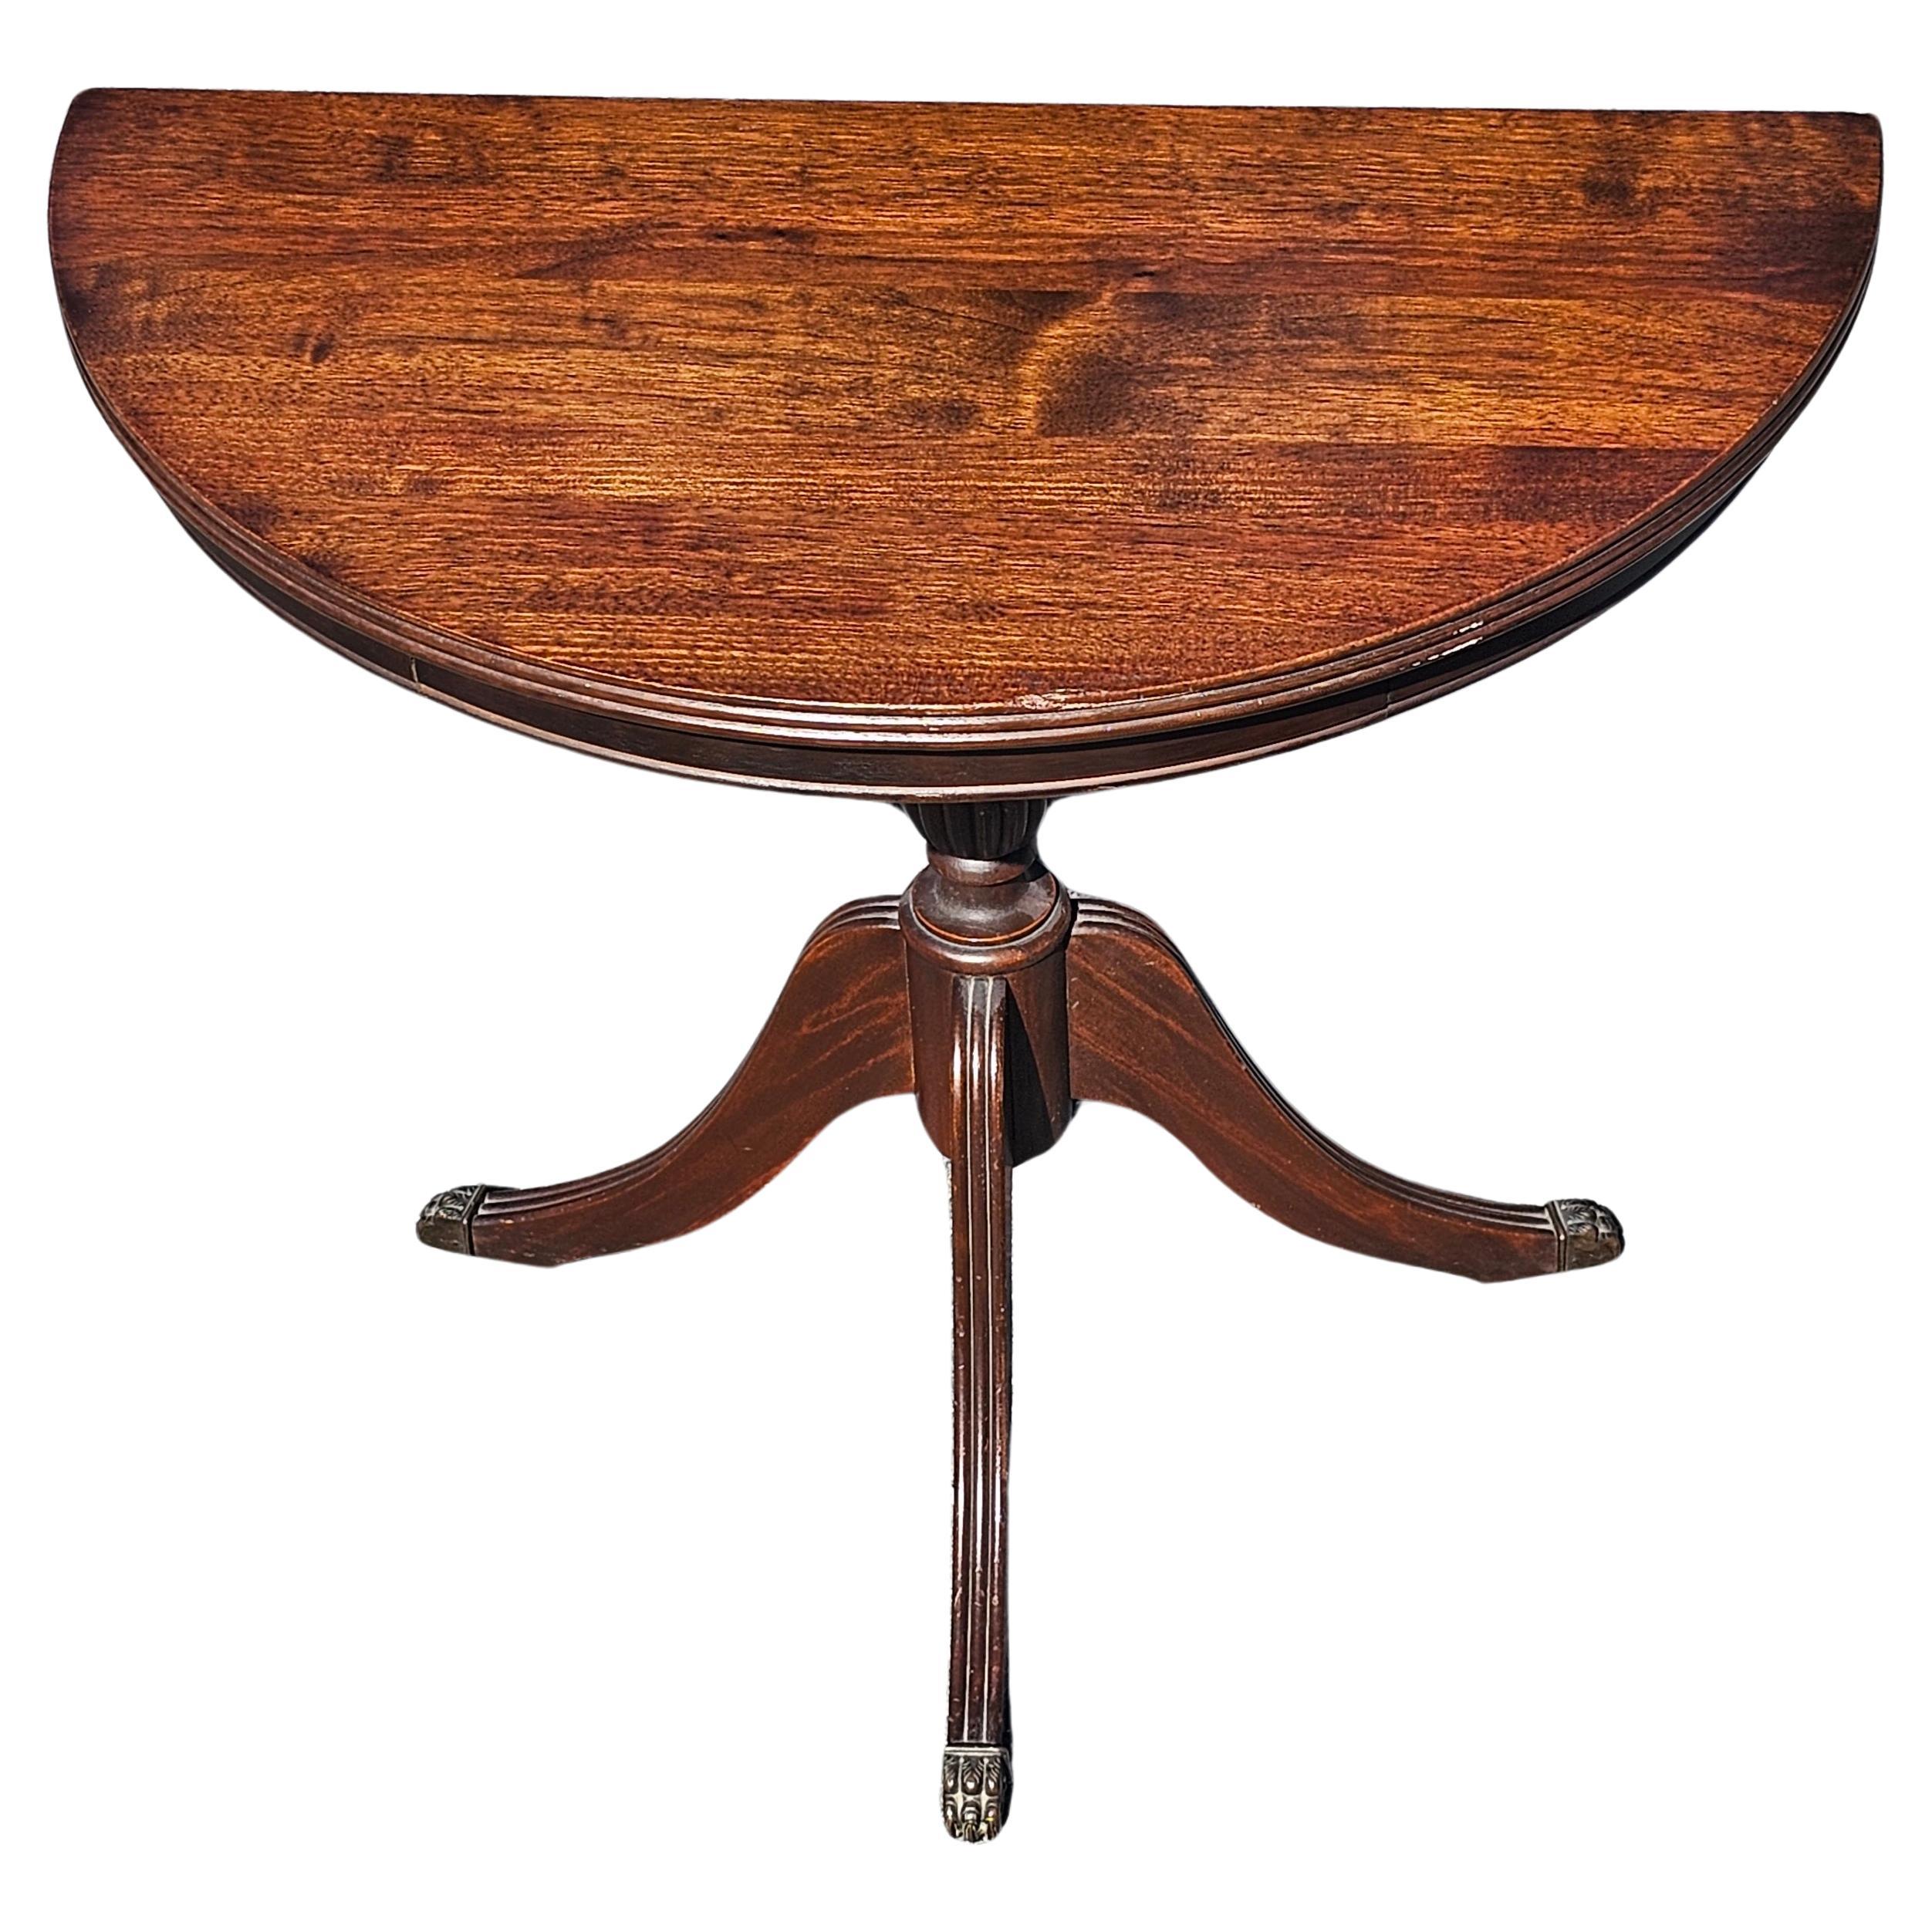 American Early 20th Century Federal Mahogany Pedestal Trifid Demilune Table For Sale